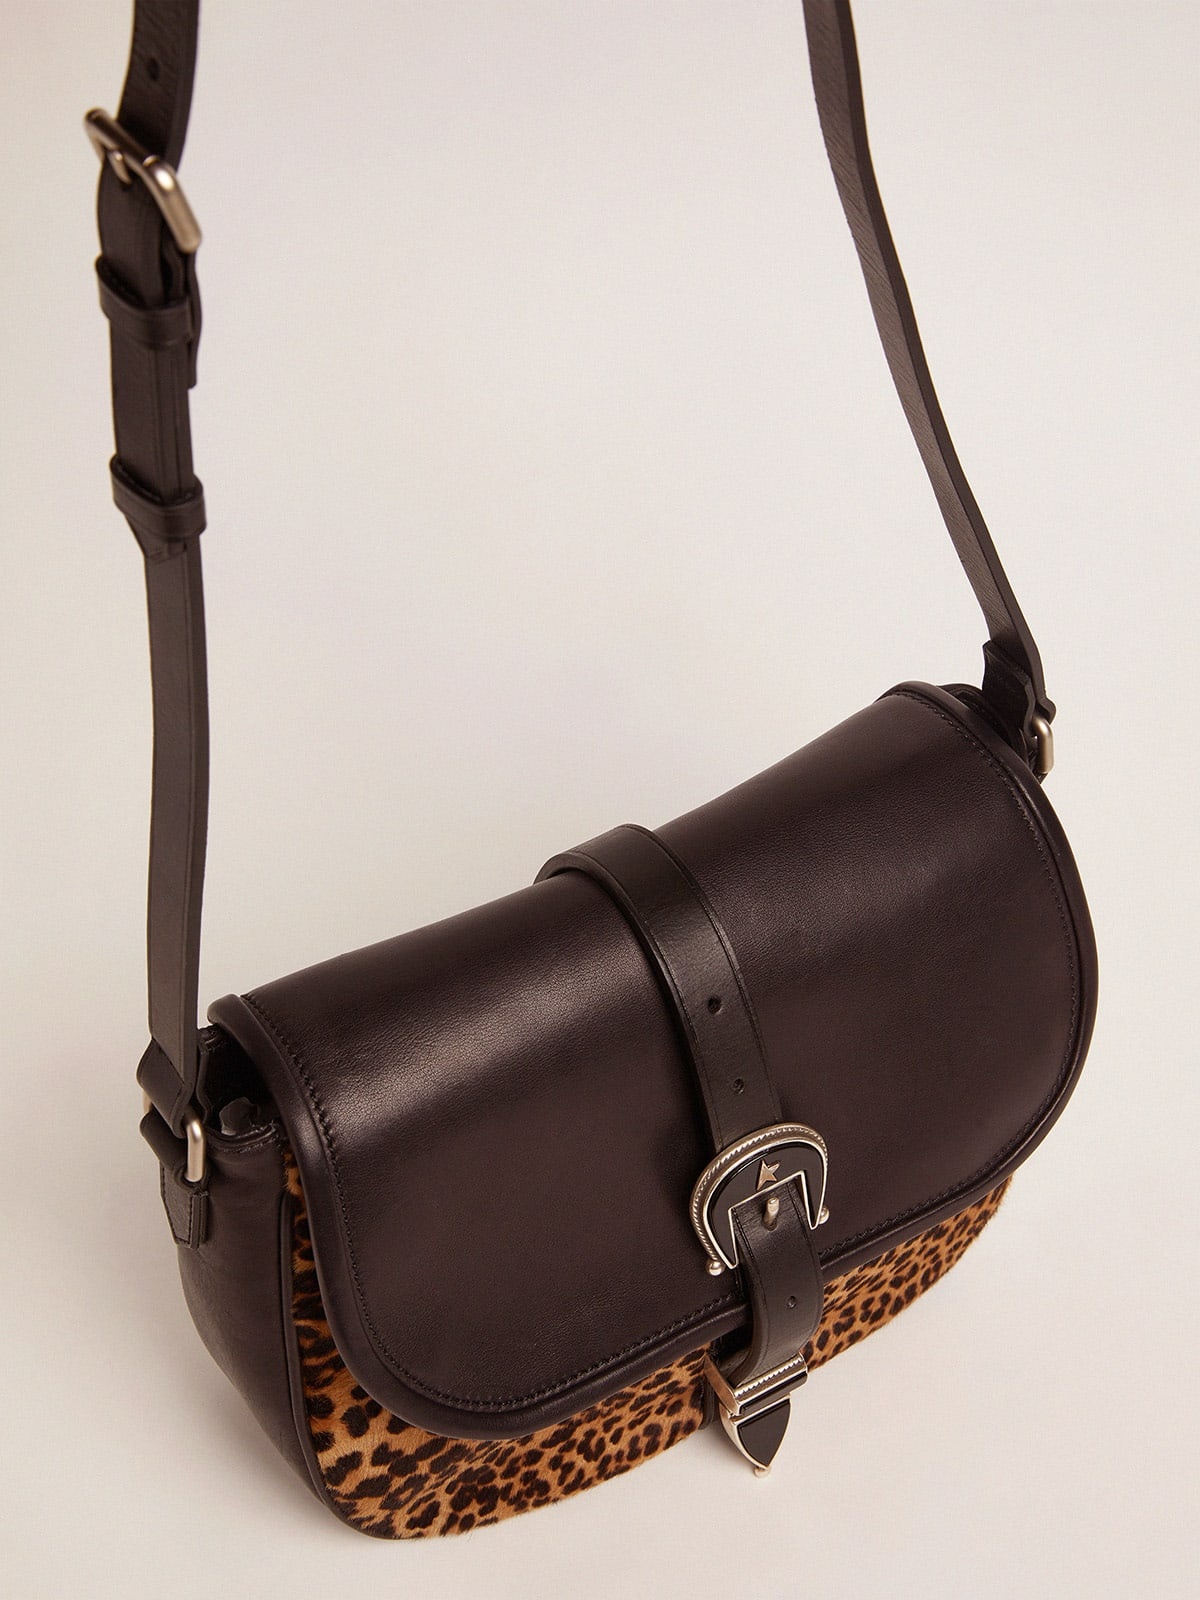 Medium Rodeo Bag in black leather and leopard-print pony skin - 2